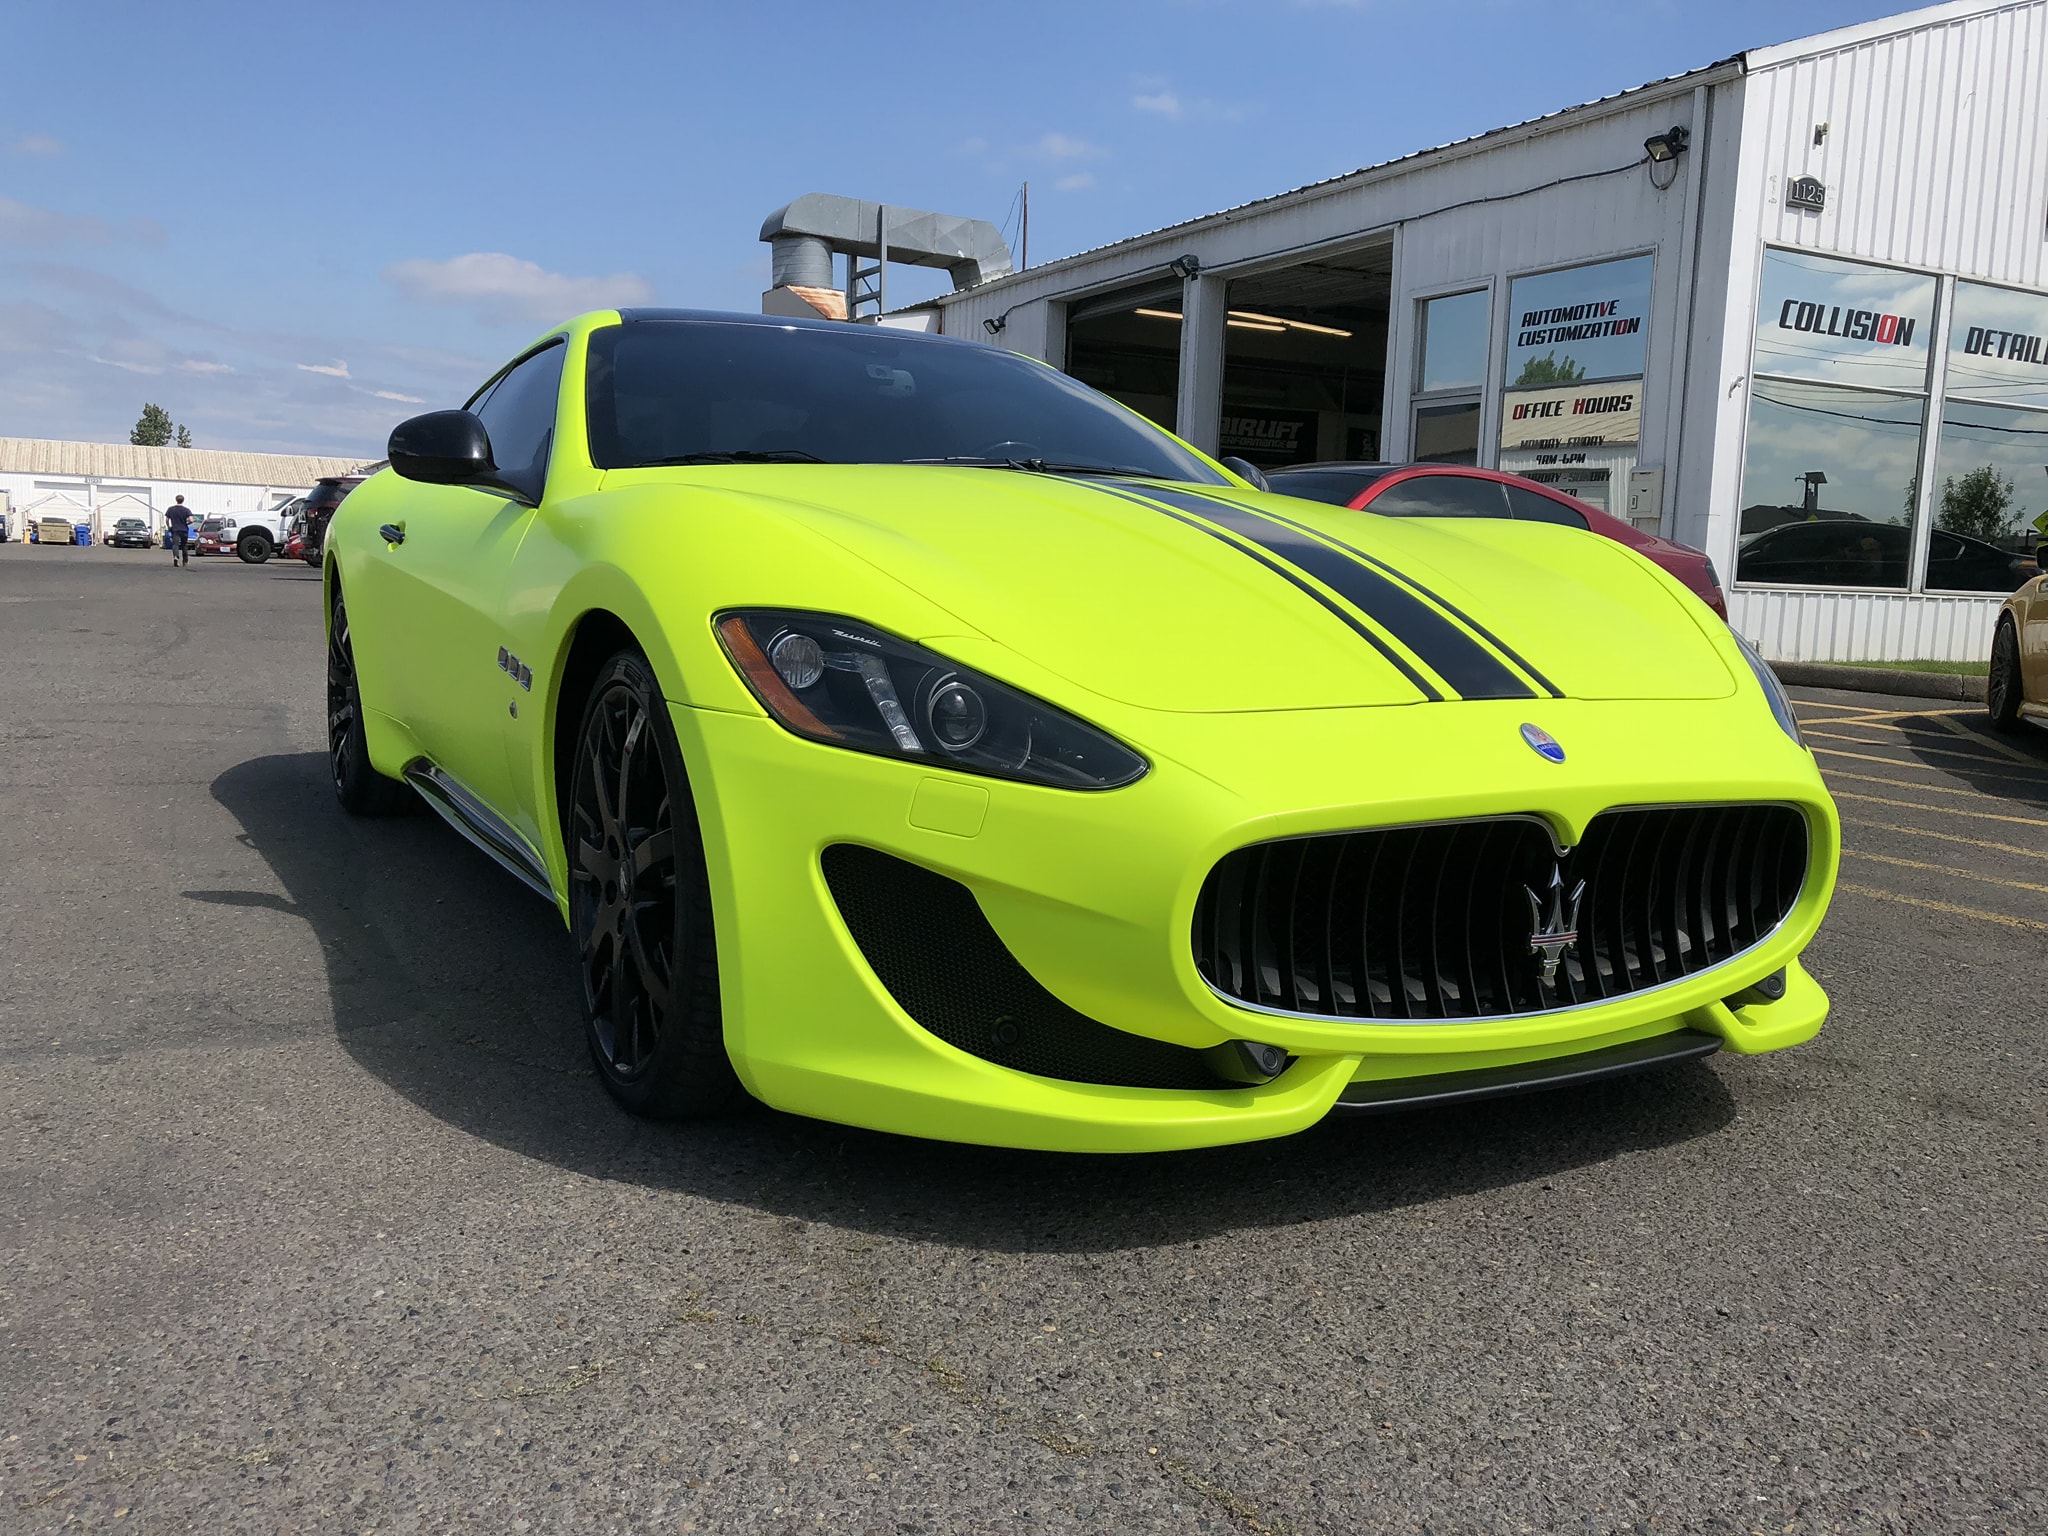 Maserati Gt Wrapped In 3m Graphics Metrorestyling